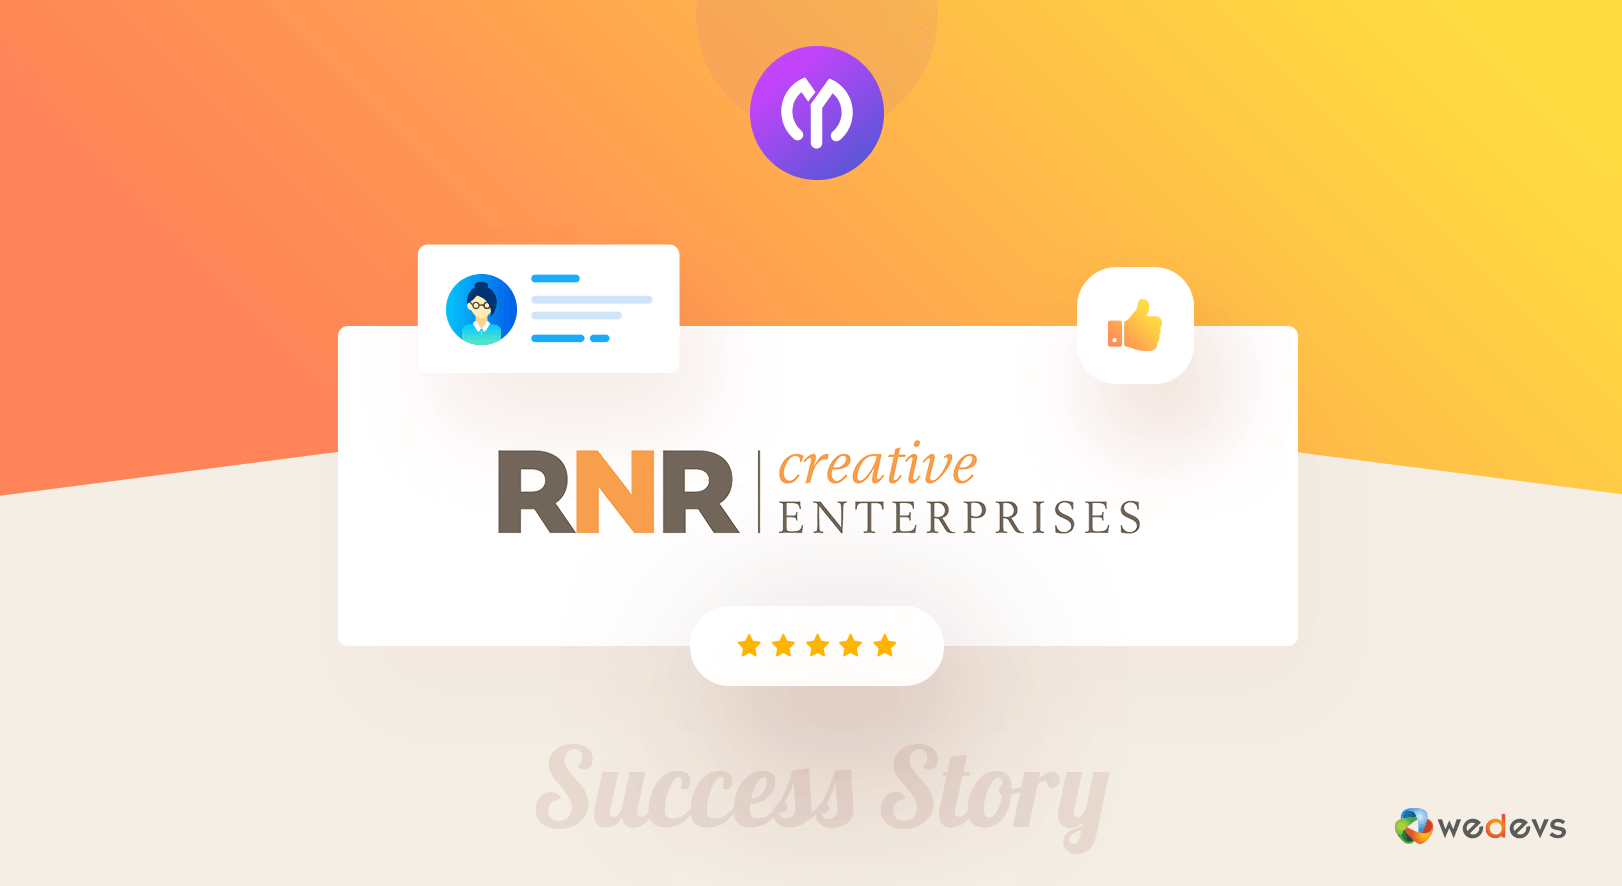 RNR Creative Enterprises Story of Success and Growth With WP Project Manager